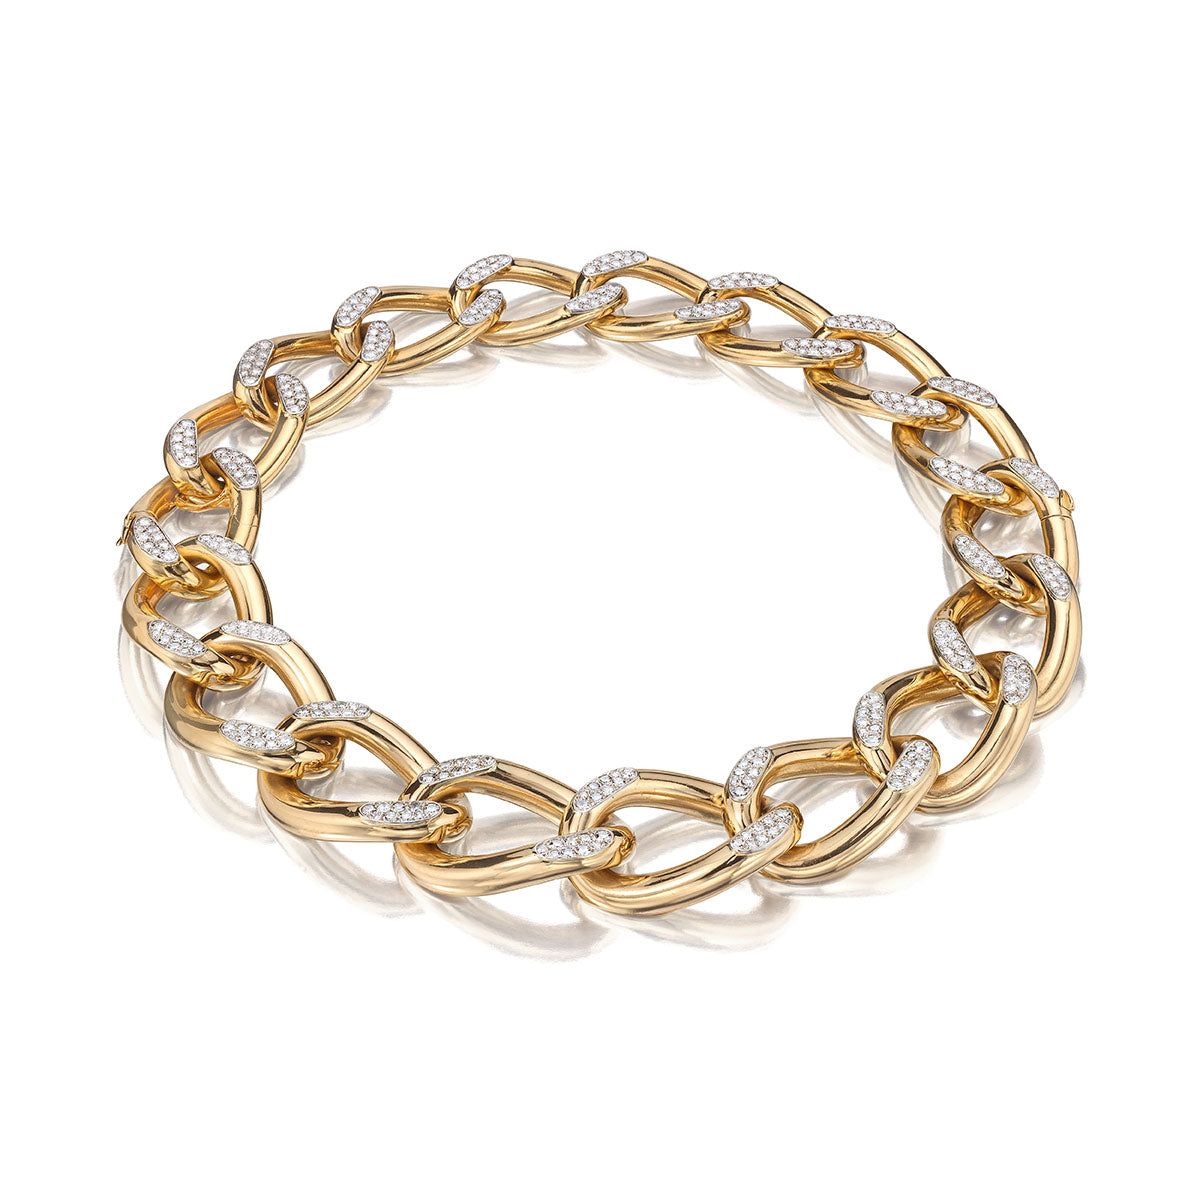 GOLD  AND  DIAMOND  TWISTED  LINK  NECKLACE  CONVERTIBLE  TO  TWO  BRACELETS BY  CARTIER,  PARIS,  CIRCA  1945